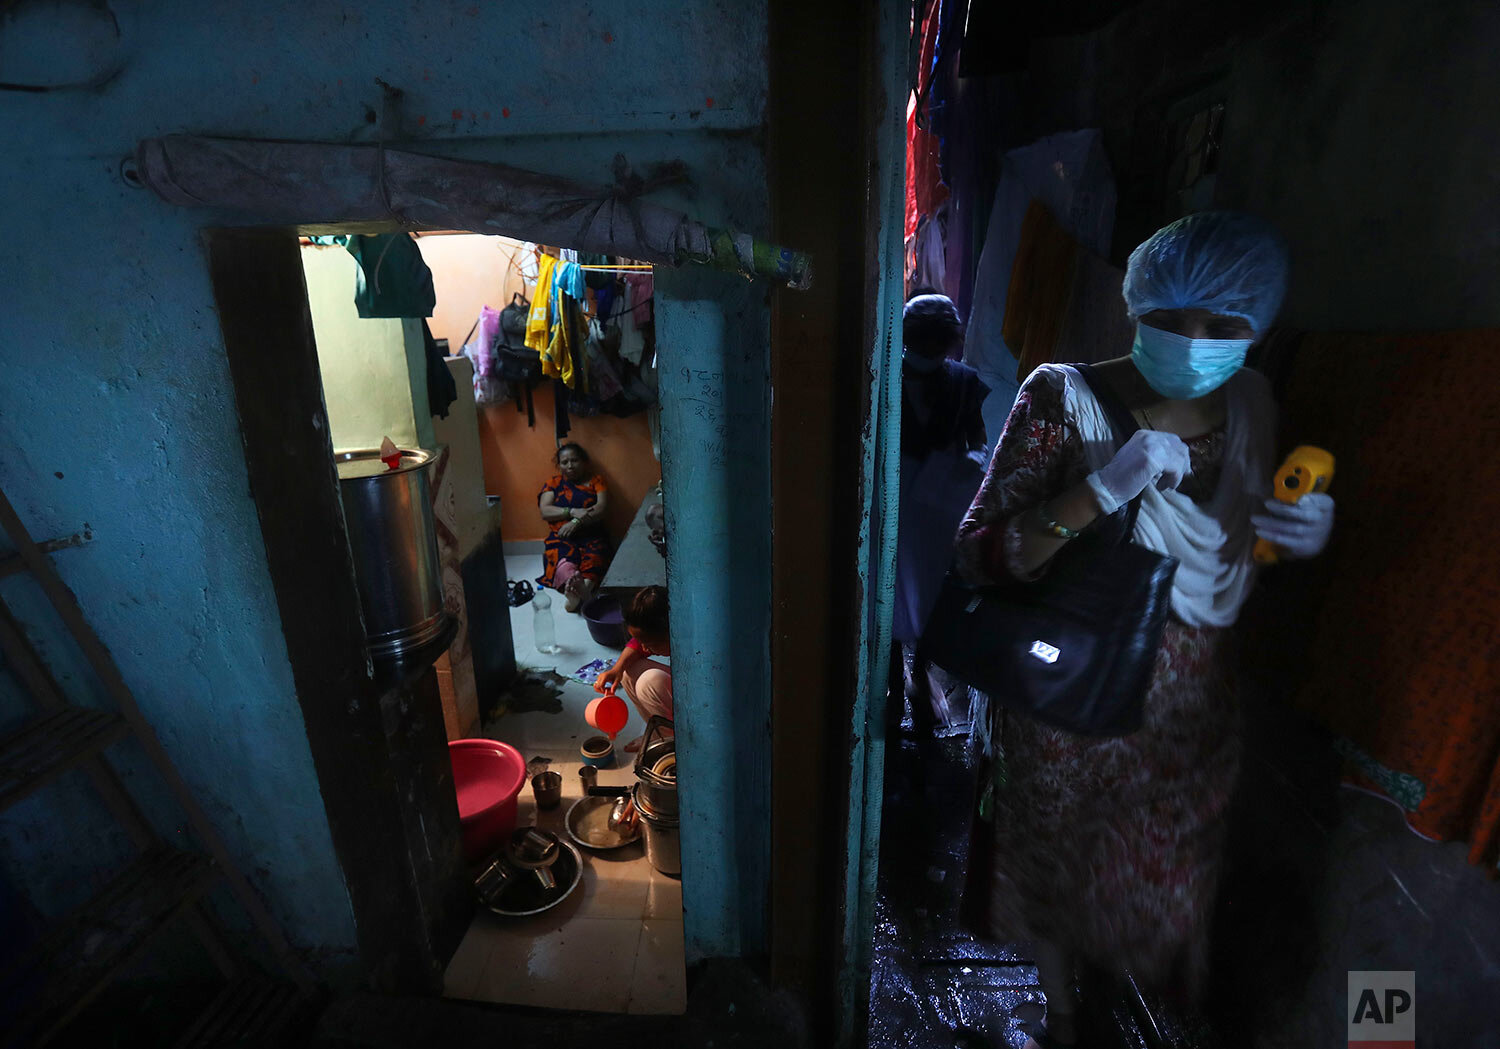  A health worker arrives to screen people for symptoms of COVID-19 in Dharavi, one of Asia's biggest slums, in Mumbai, India, Friday, Sept. 4, 2020.  (AP Photo/Rafiq Maqbool) 